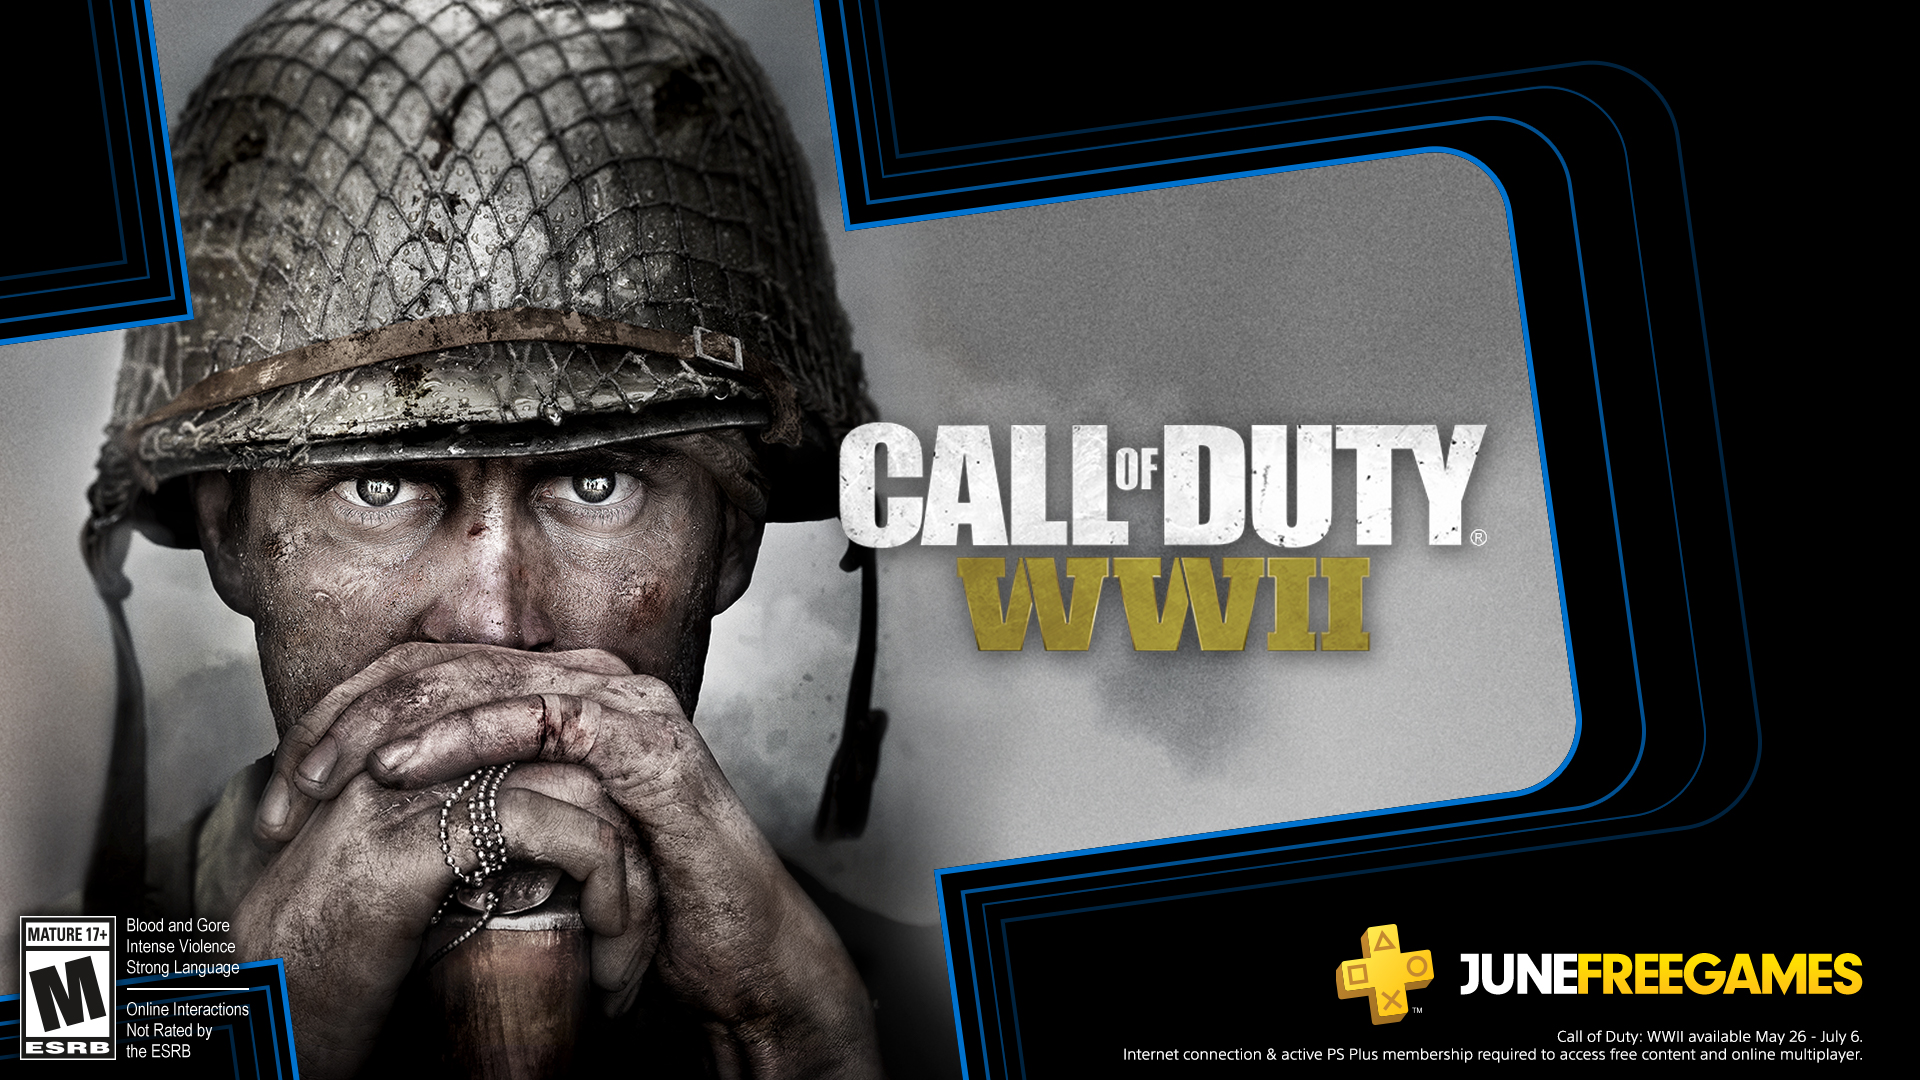 Call of Duty WWII is free on PS Plus